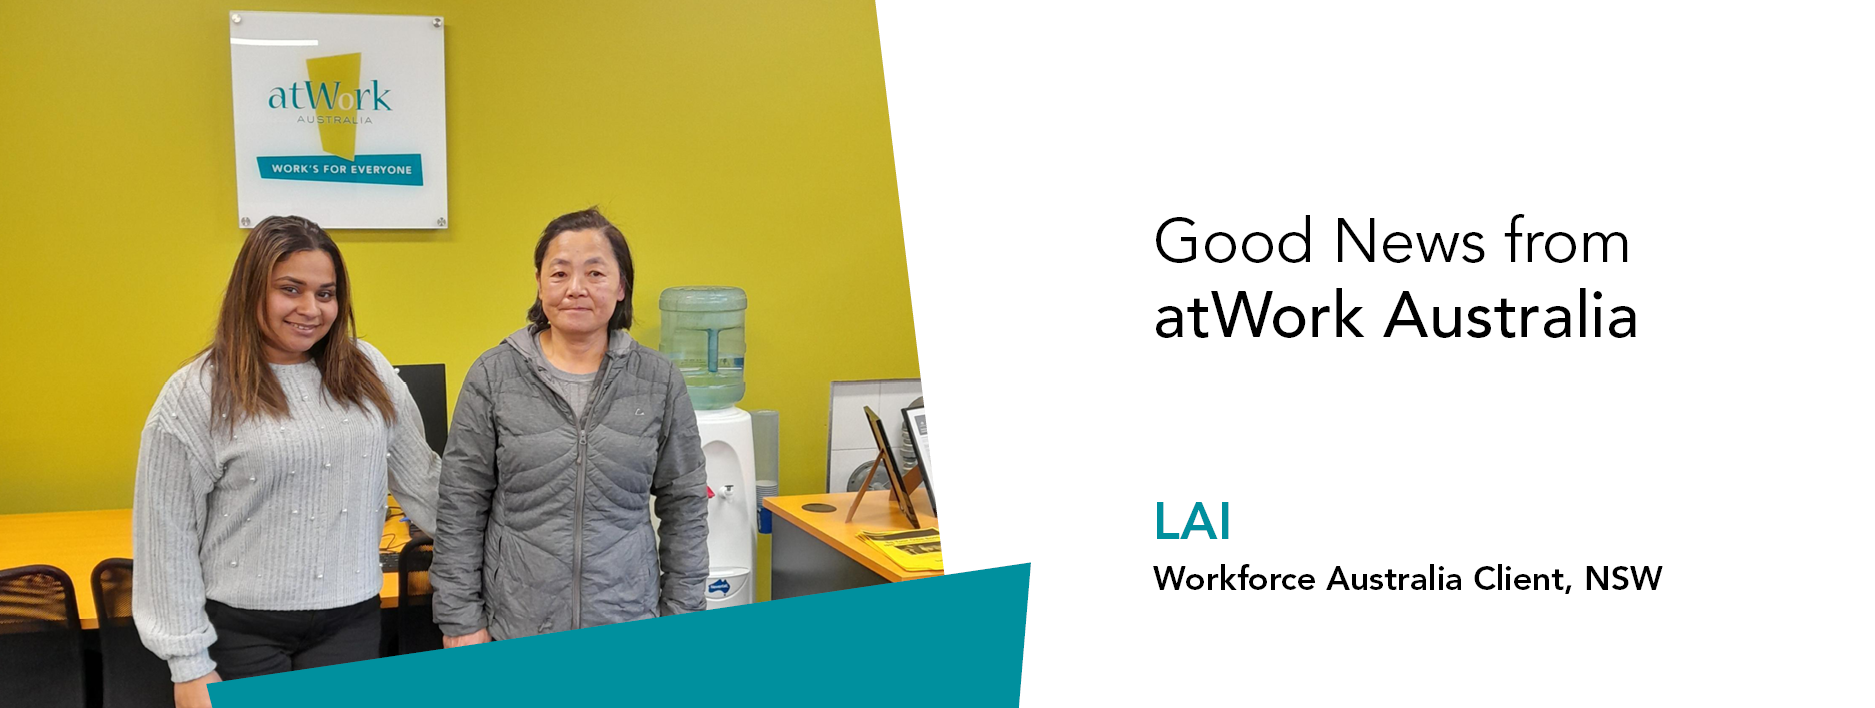 On the left, Job Coach Karishma stands next to Workforce Australia client Lai in the atWork Australia office. Text reads: Good News from atWork Australia